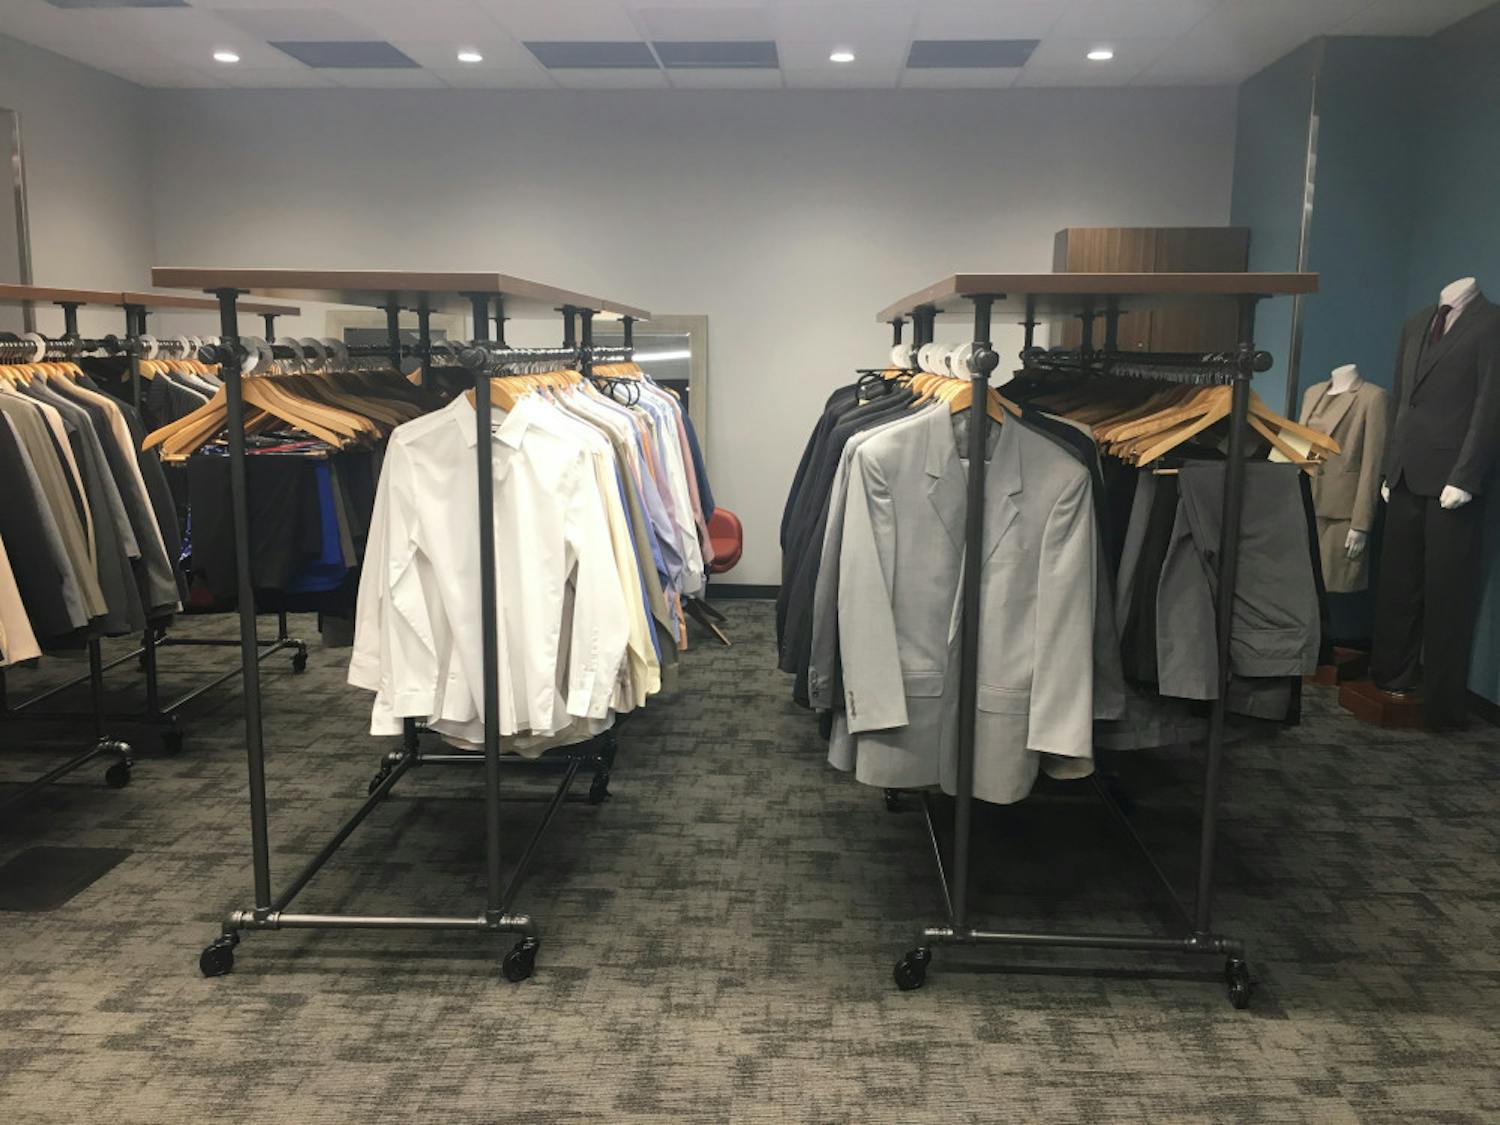 Career Connections Center staff are renovating the new space for the Gator Career Closet. The new space will have a larger selection of business attire for students.